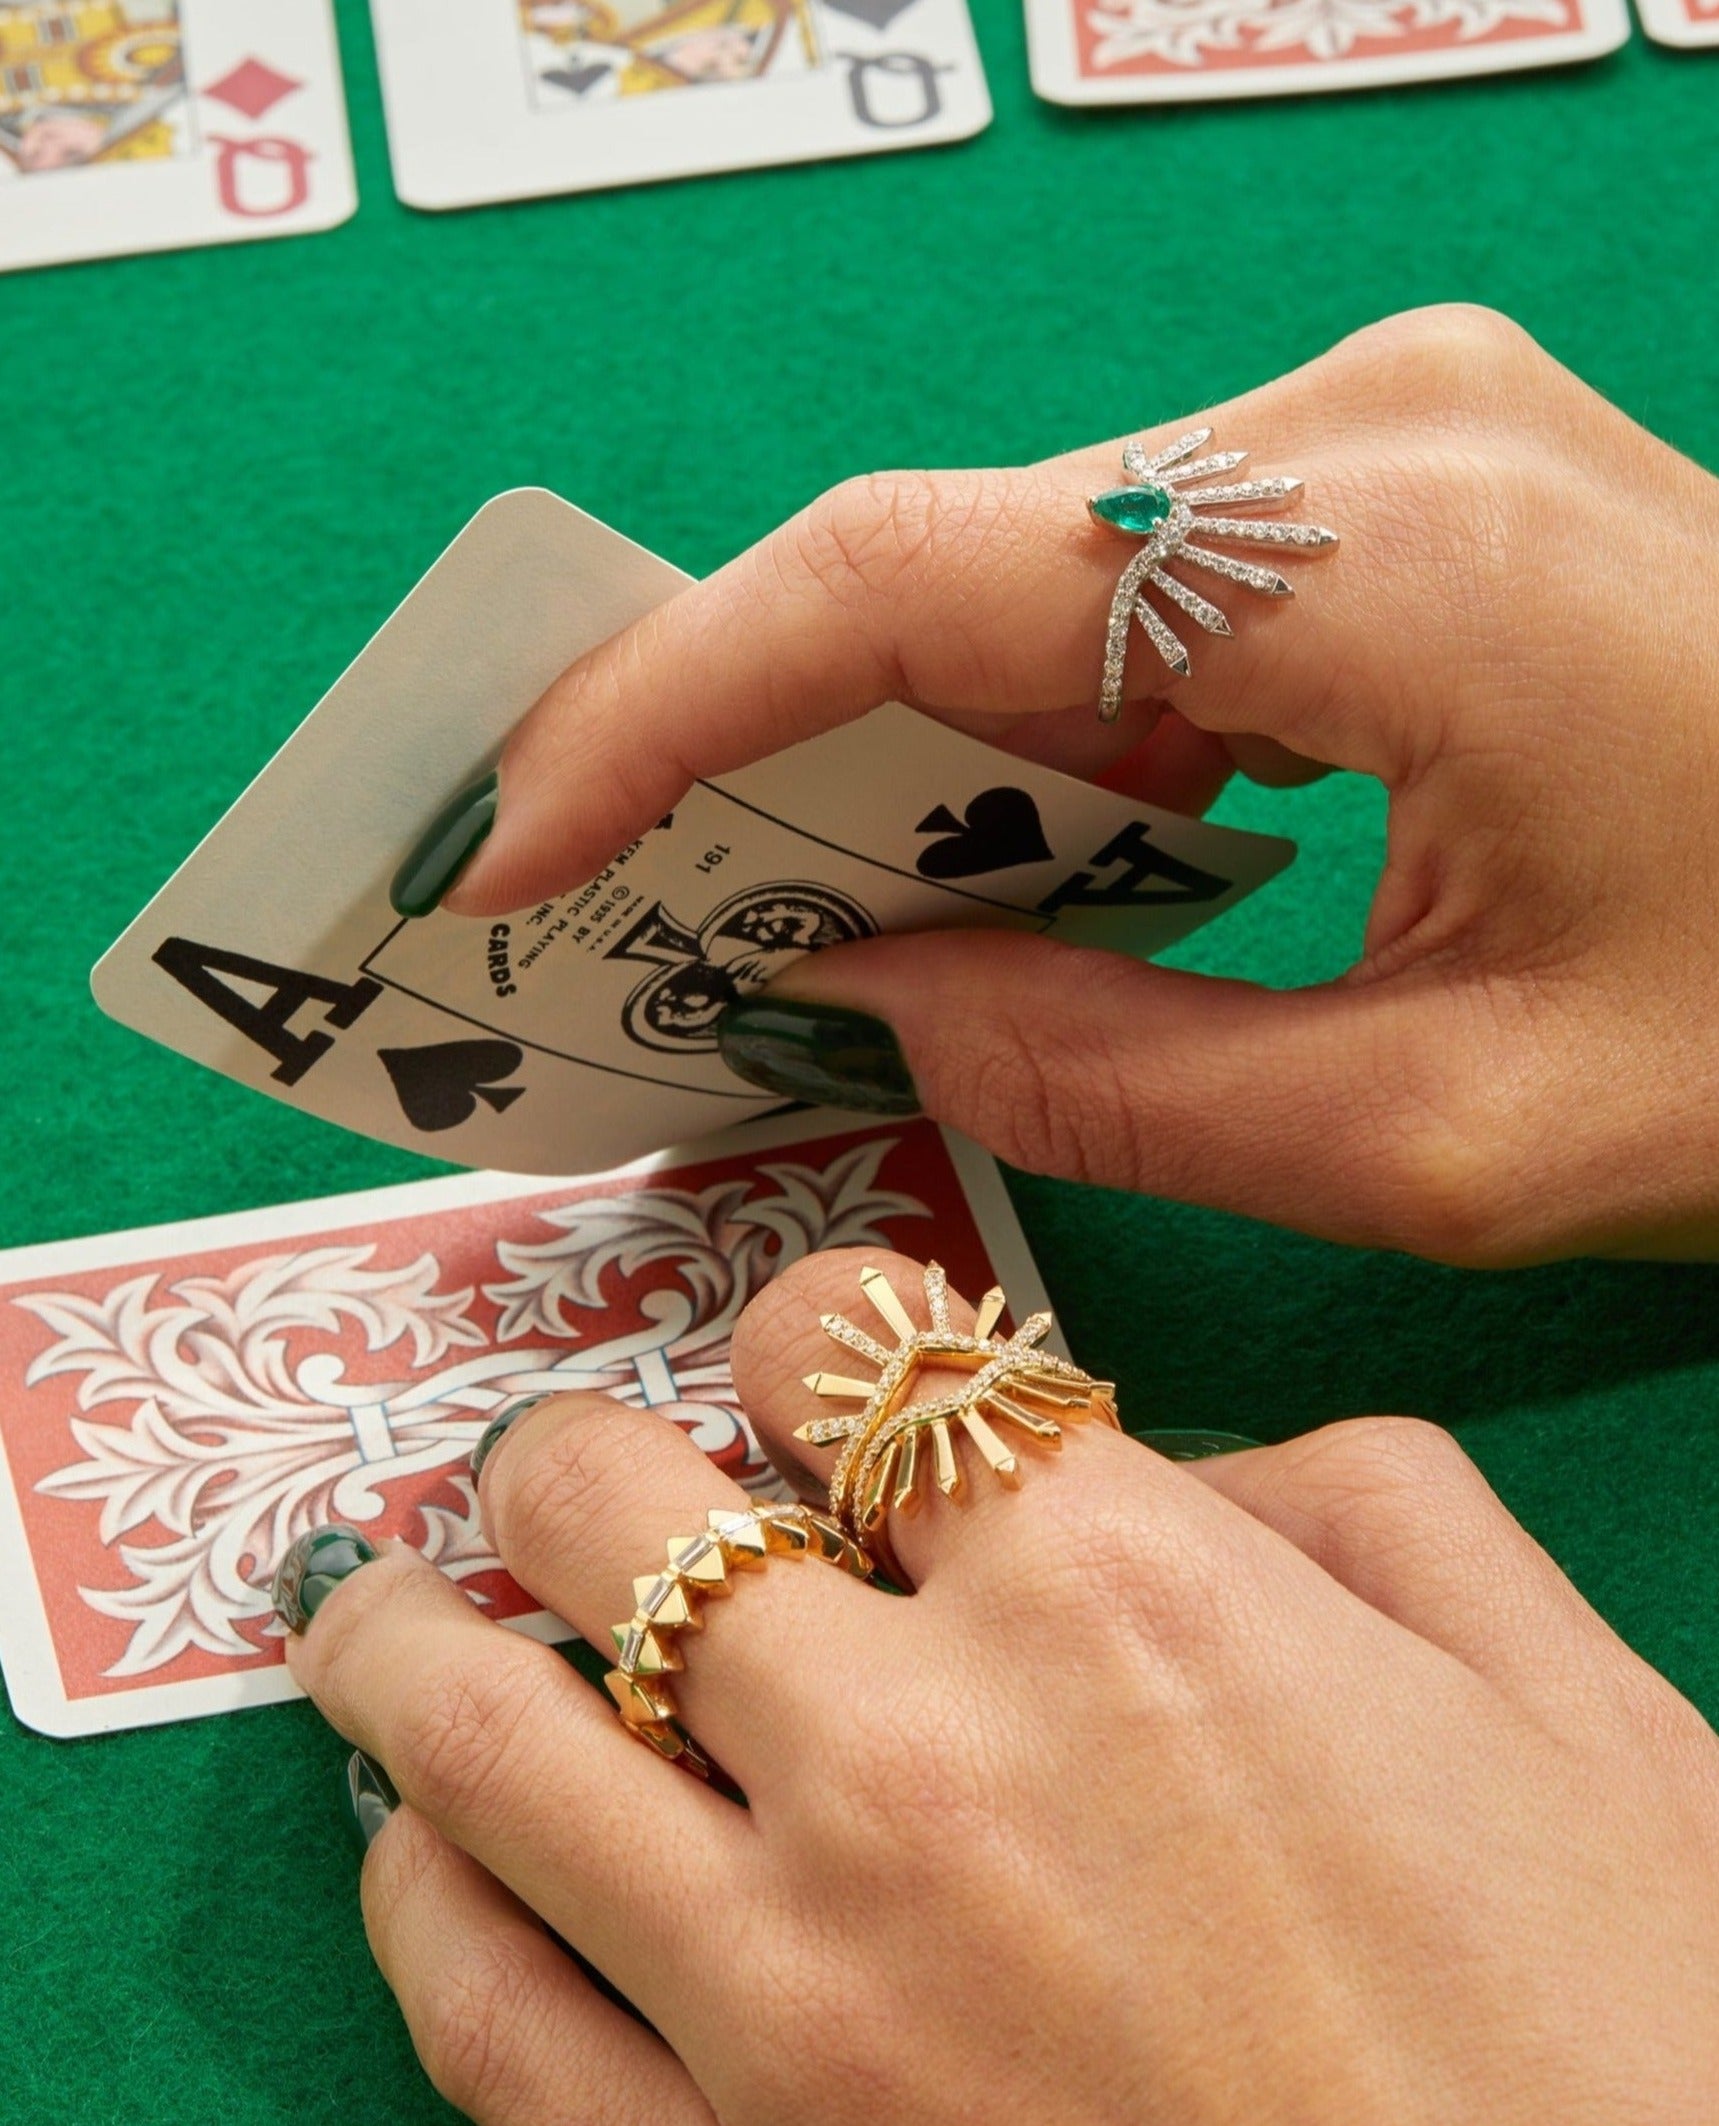 Rings displayed on hand model playing cards. 